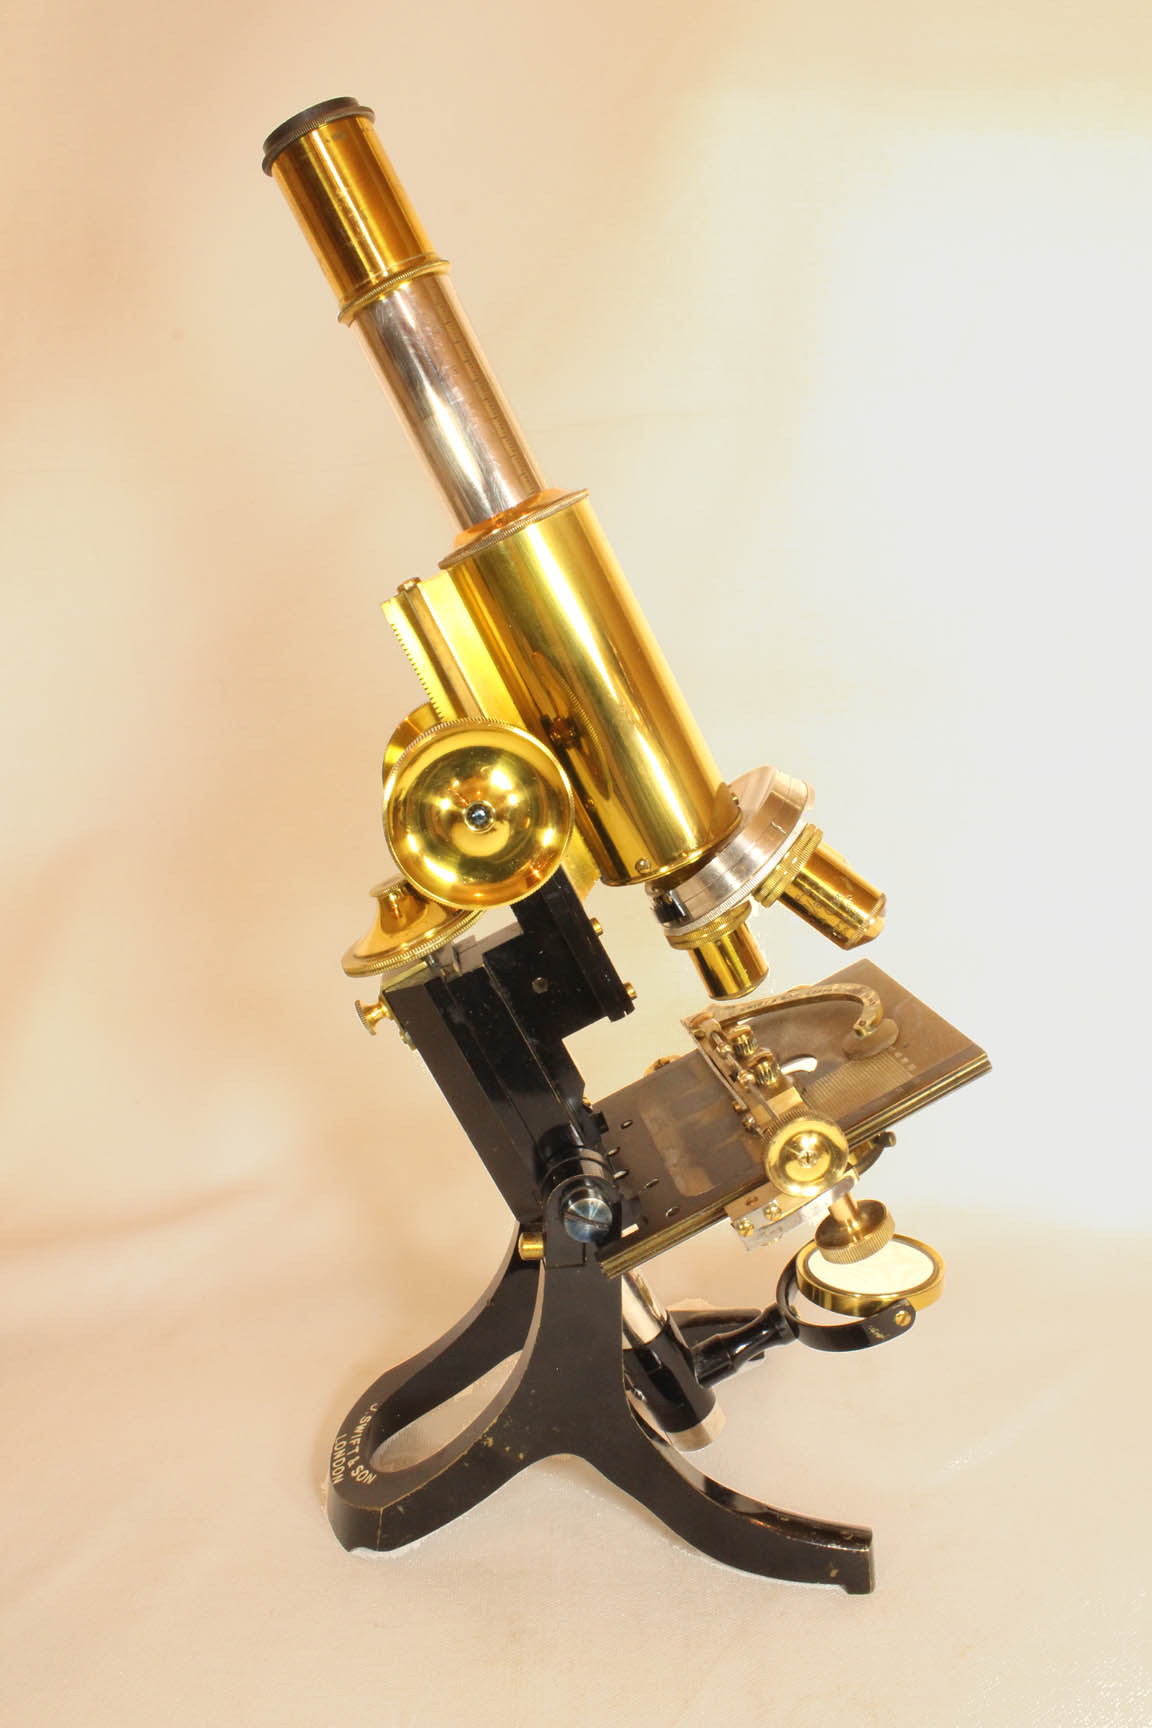 Swift Bacteriological microscope right side